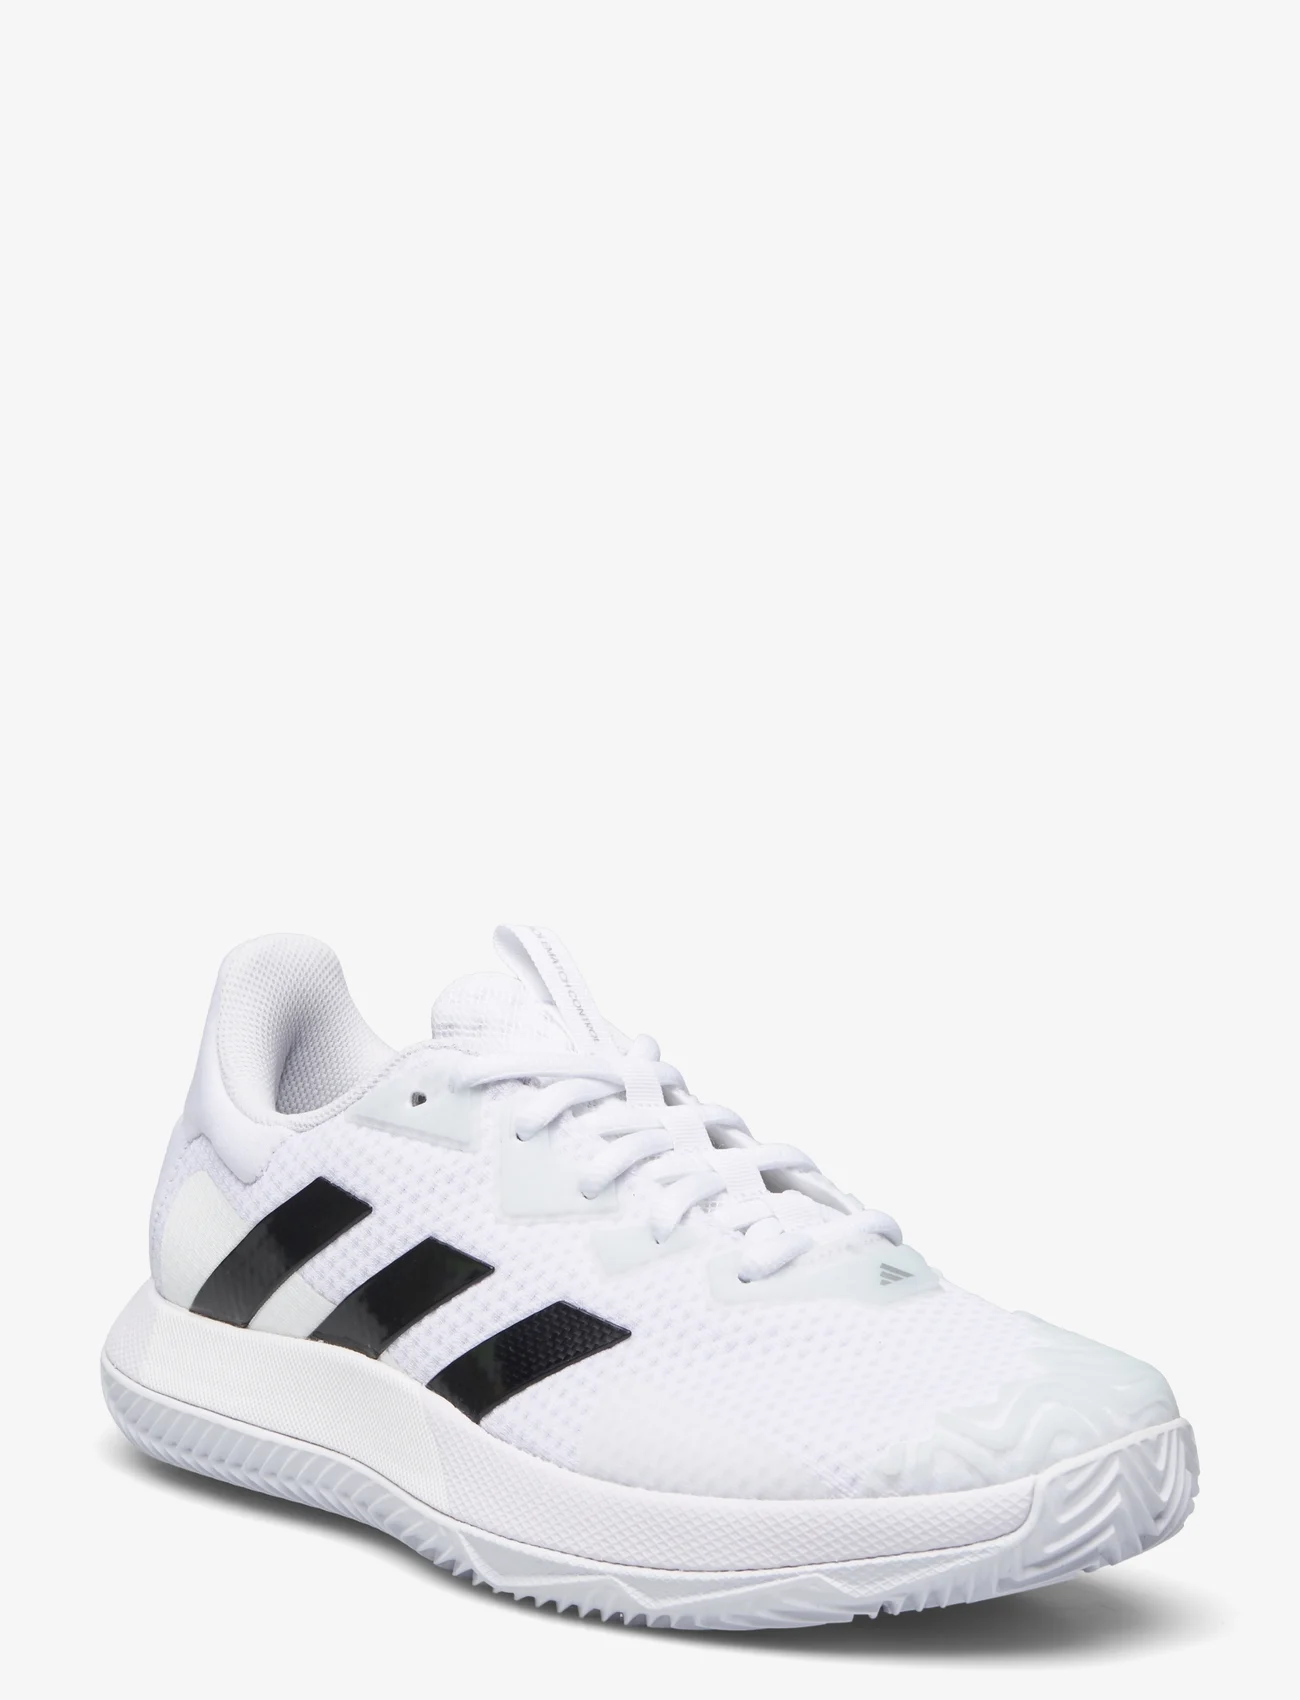 adidas Performance - SOLEMATCH CONTROL M CLAY - racketsports shoes - 000/white - 0